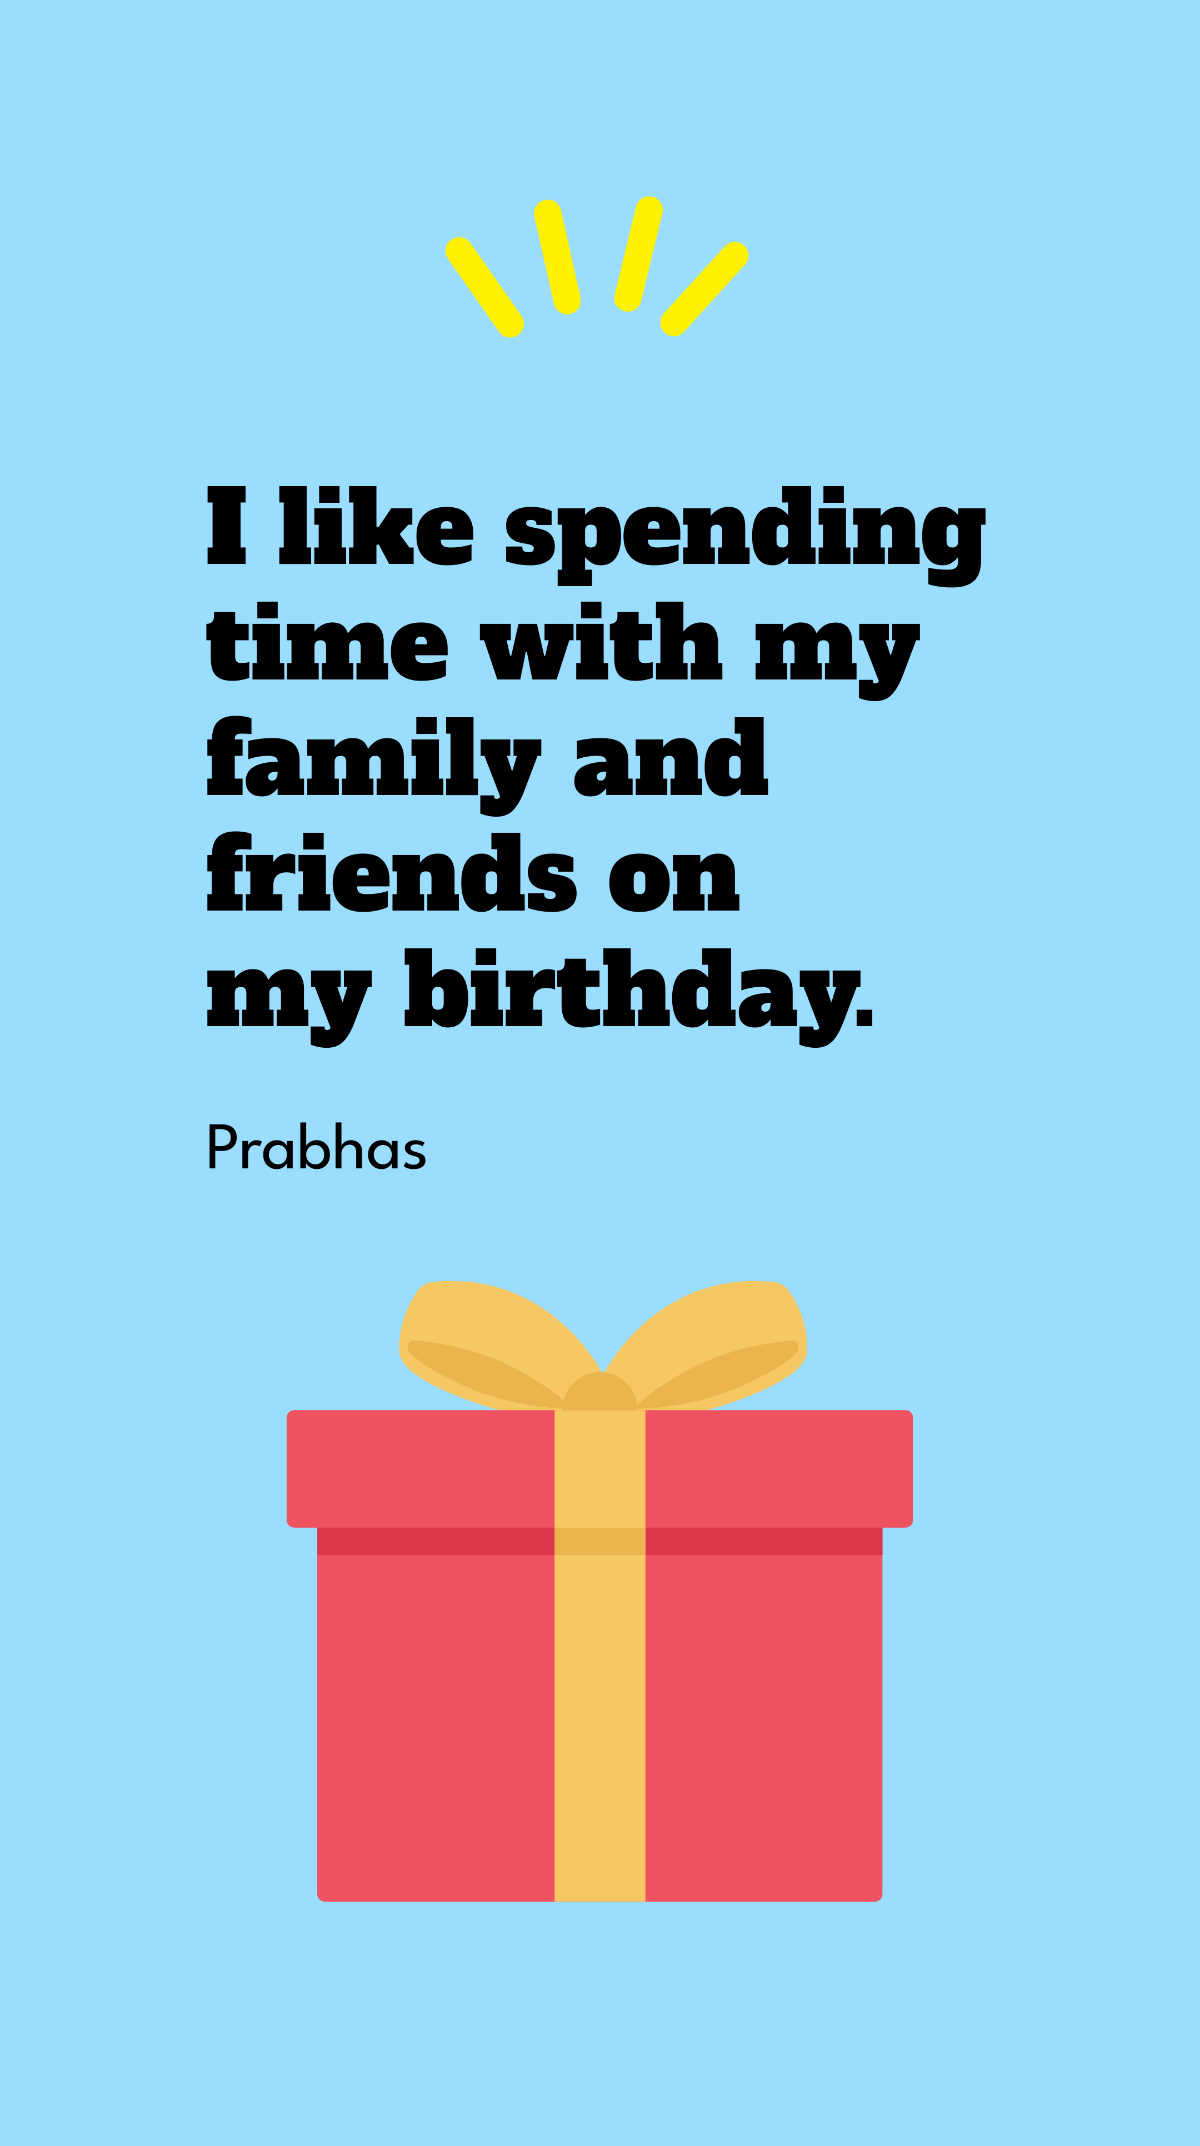 Prabhas - I like spending time with my family and friends on my birthday. Template